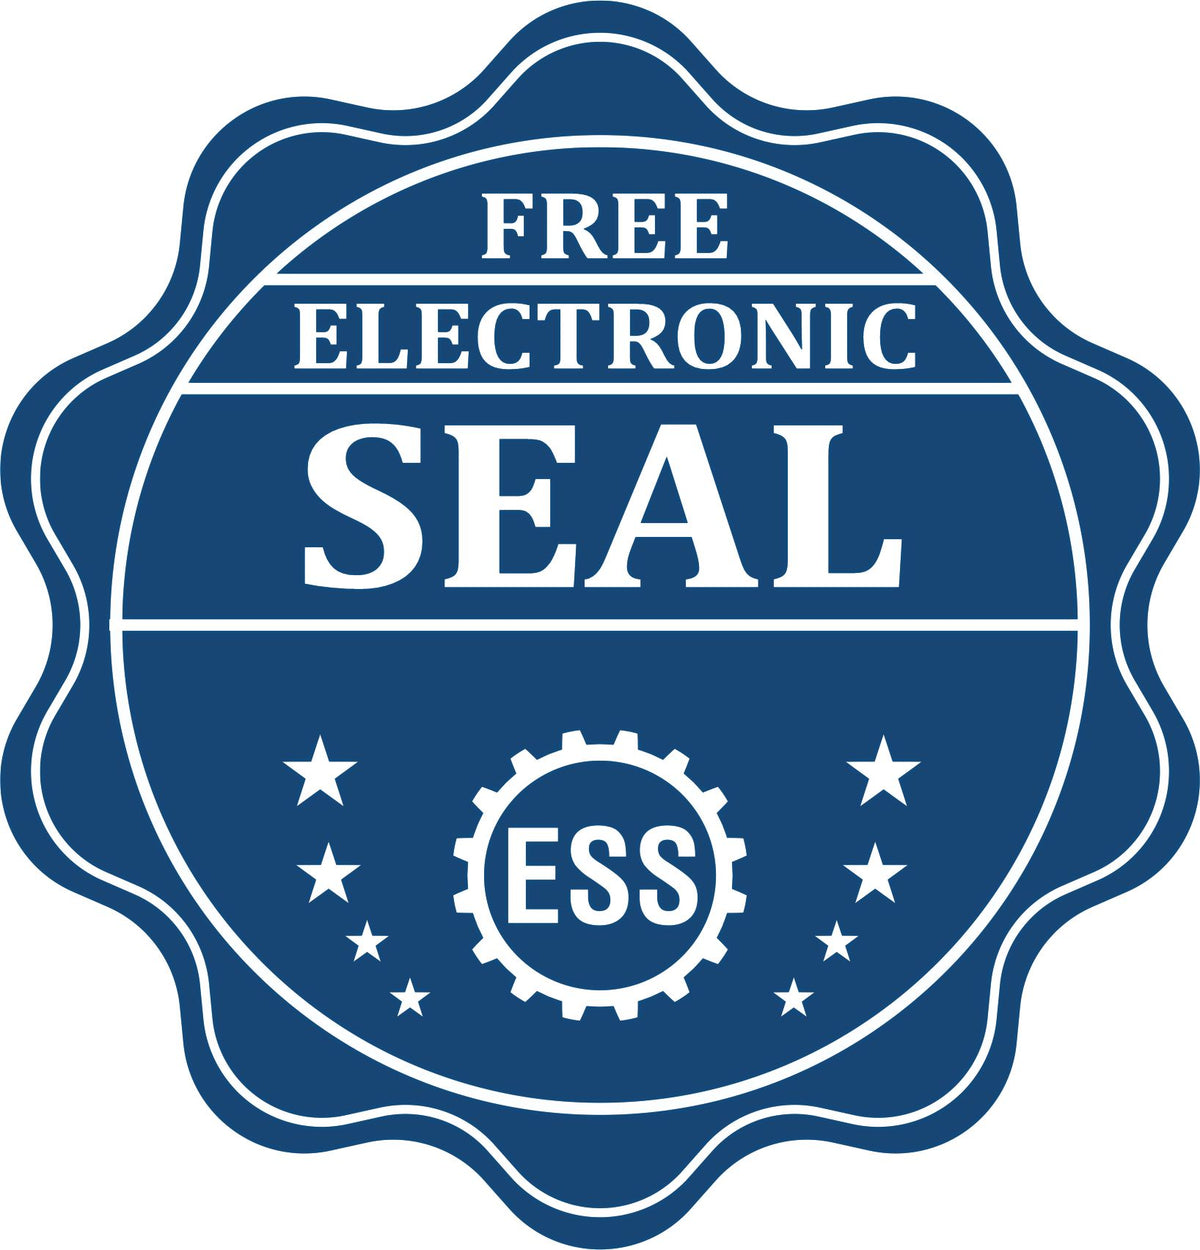 A badge showing a free electronic seal for the Hybrid North Dakota Landscape Architect Seal with stars and the ESS gear on the emblem.